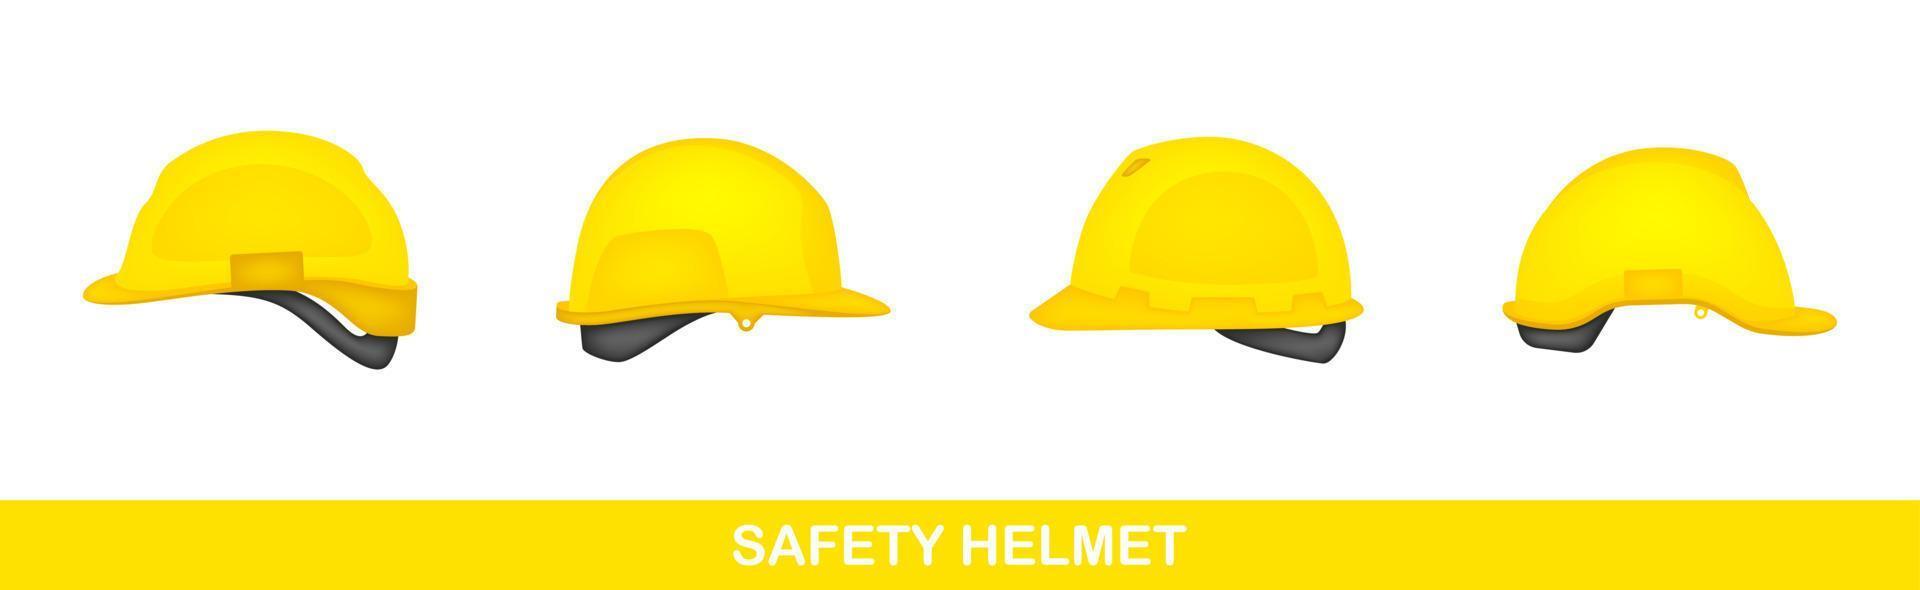 Set of Safety helmet isolated on white background vector